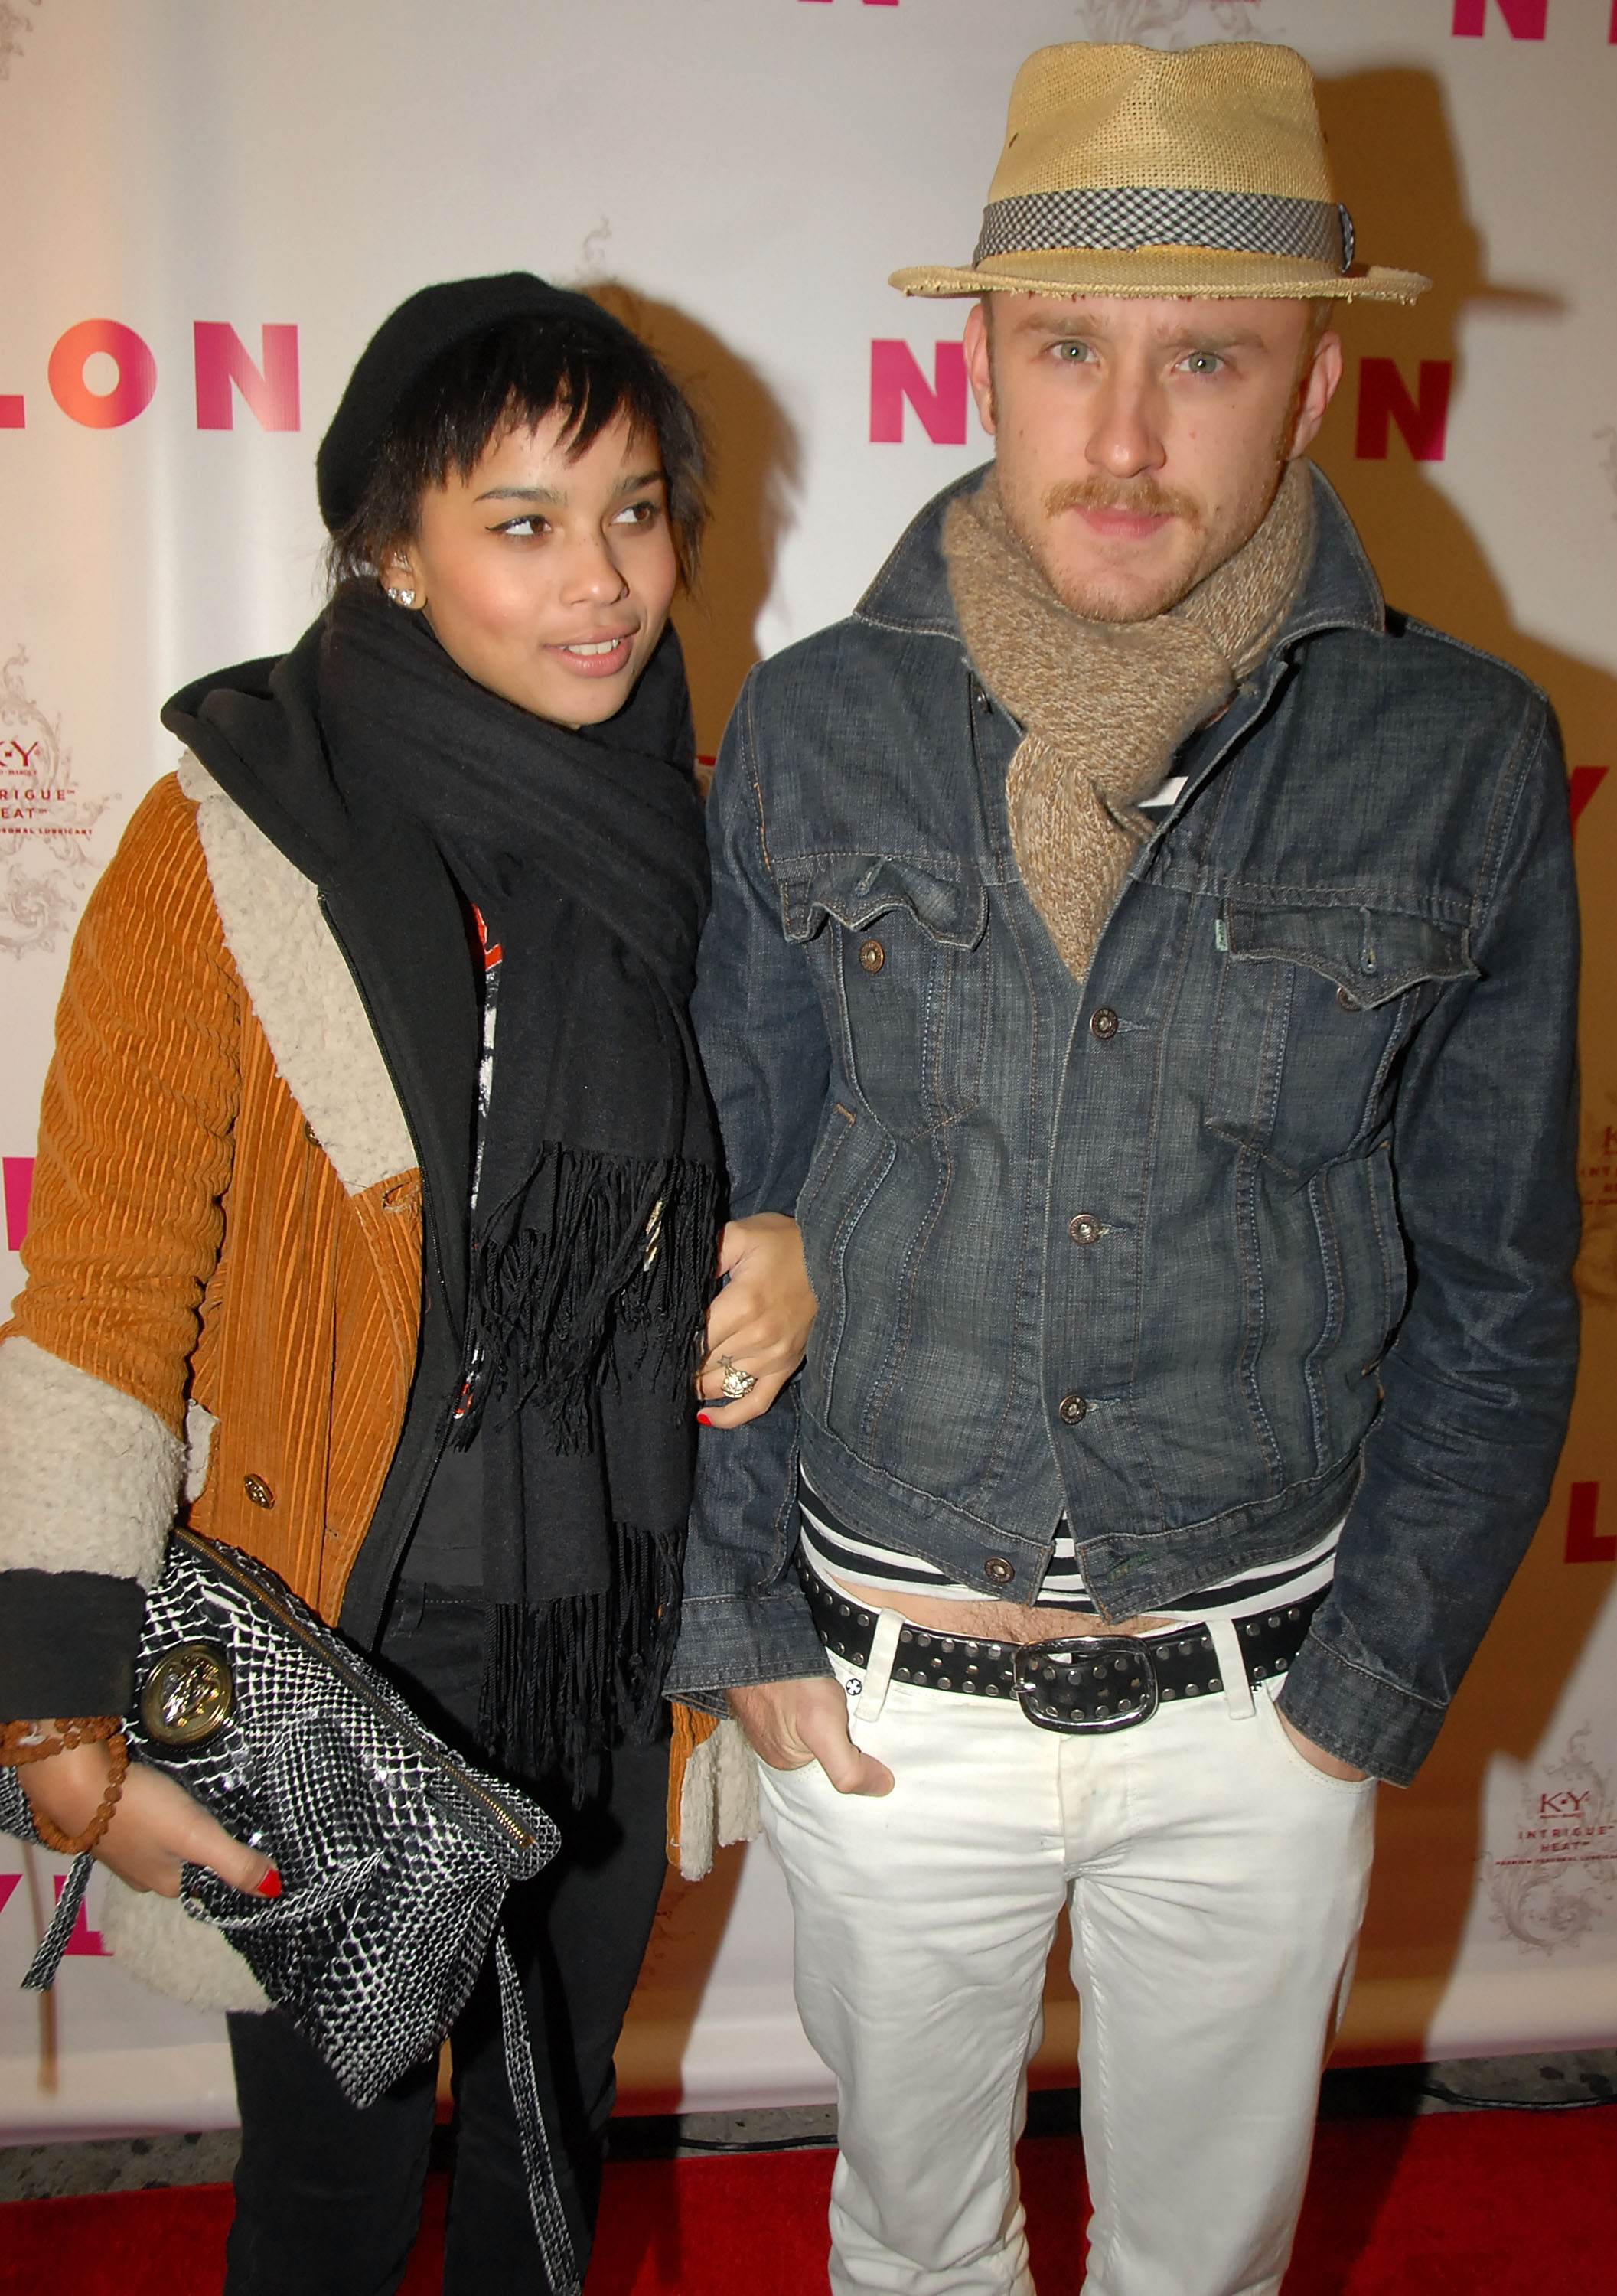 Zoe Kravitz and Ben Foster attend NYLON February Issue Launch with The Kills at Bowery Ballroom, on February 11, 2007 in New York City. | Source: Getty Images